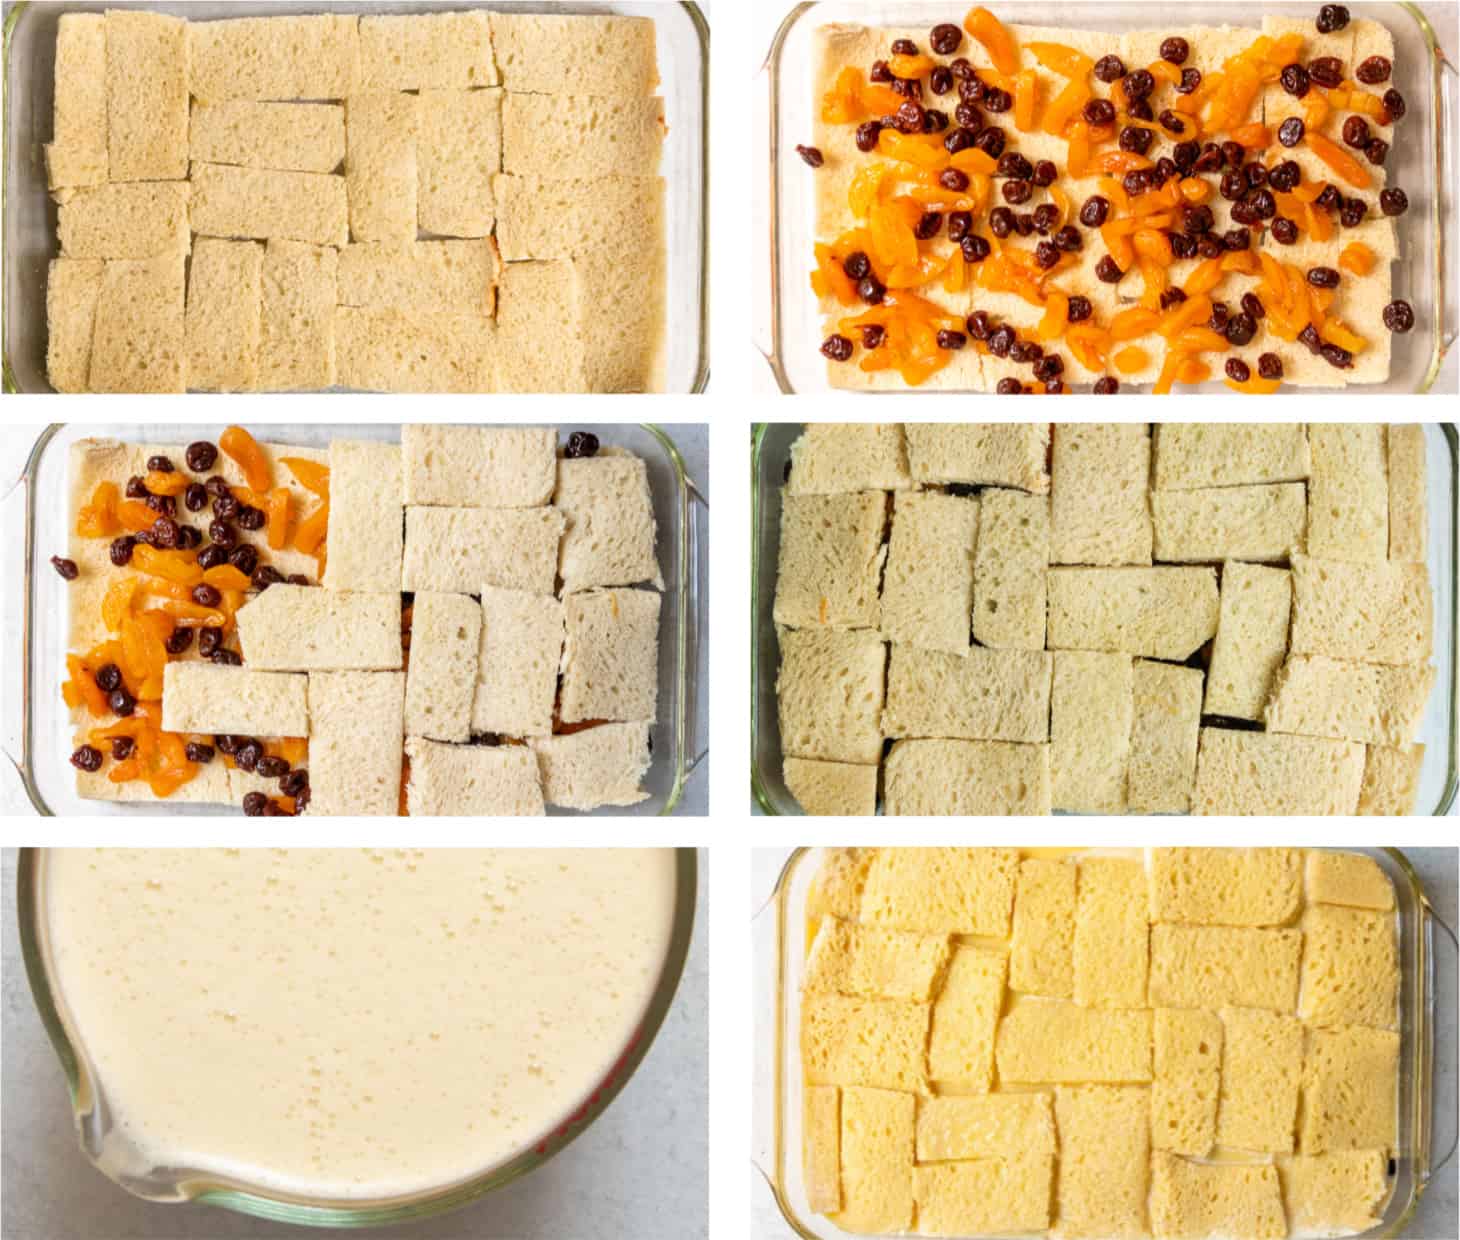 Steps of how to assemble the bread pudding, adding fresh custard